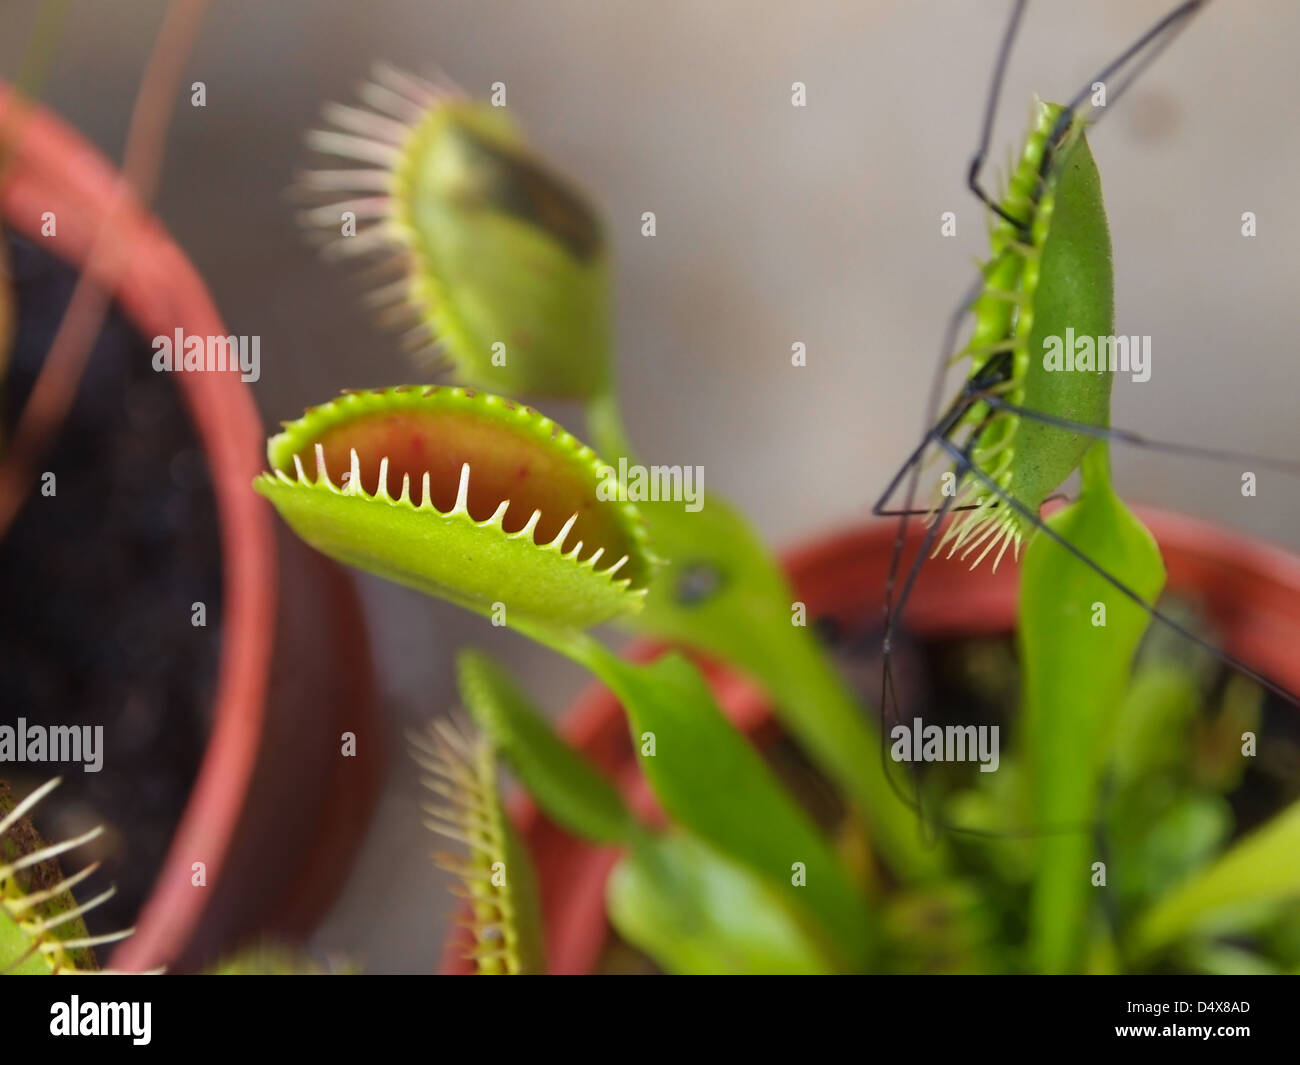 A venus fly trap has captured a spider and is beginning the digestion process. Stock Photo